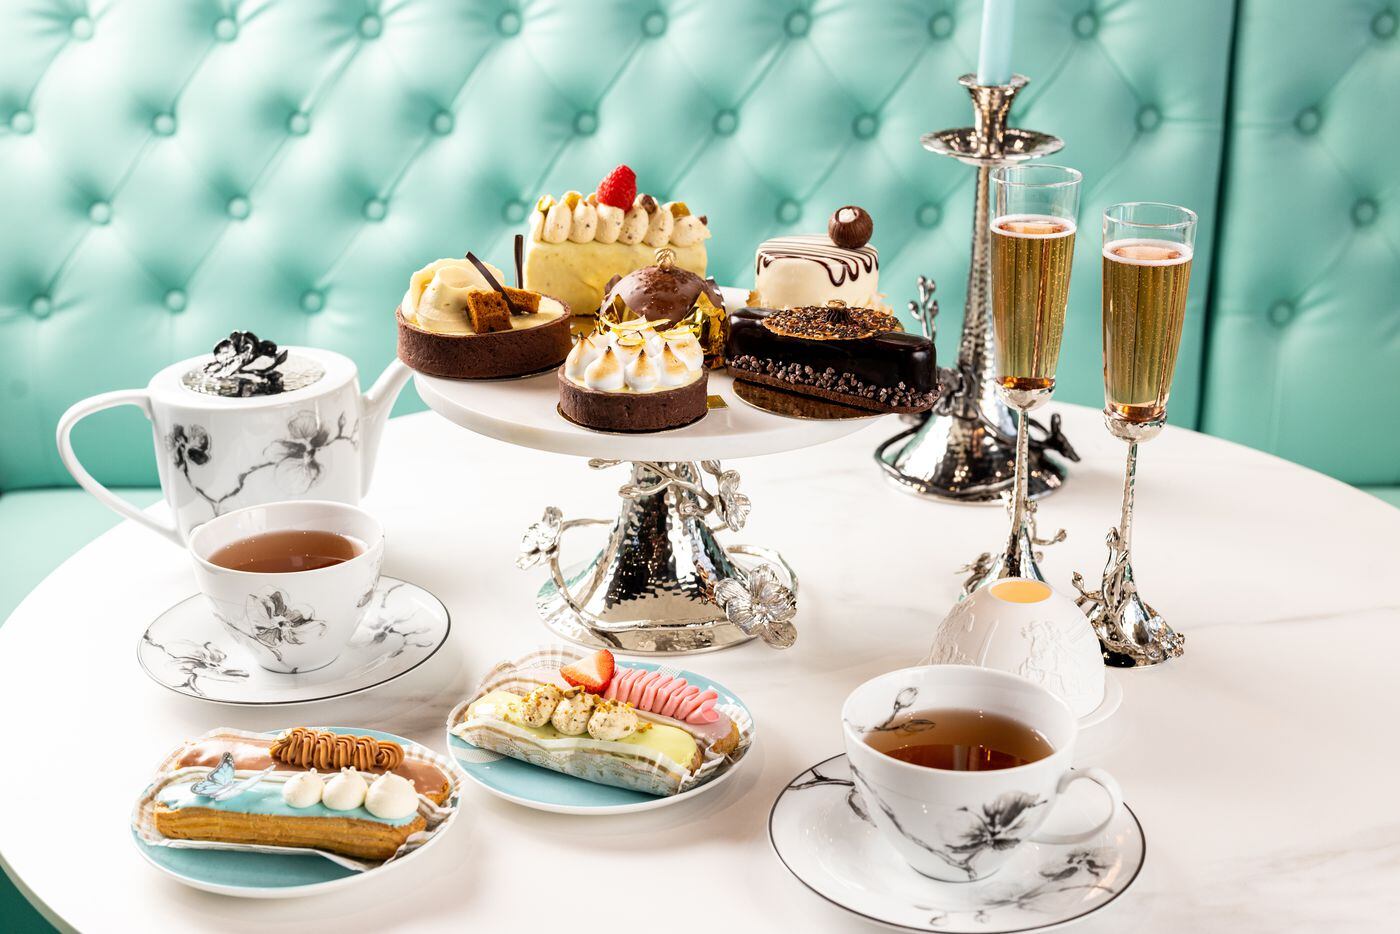 Afternoon tea can be part of the experience at La Parisienne French Bistro in Frisco. 